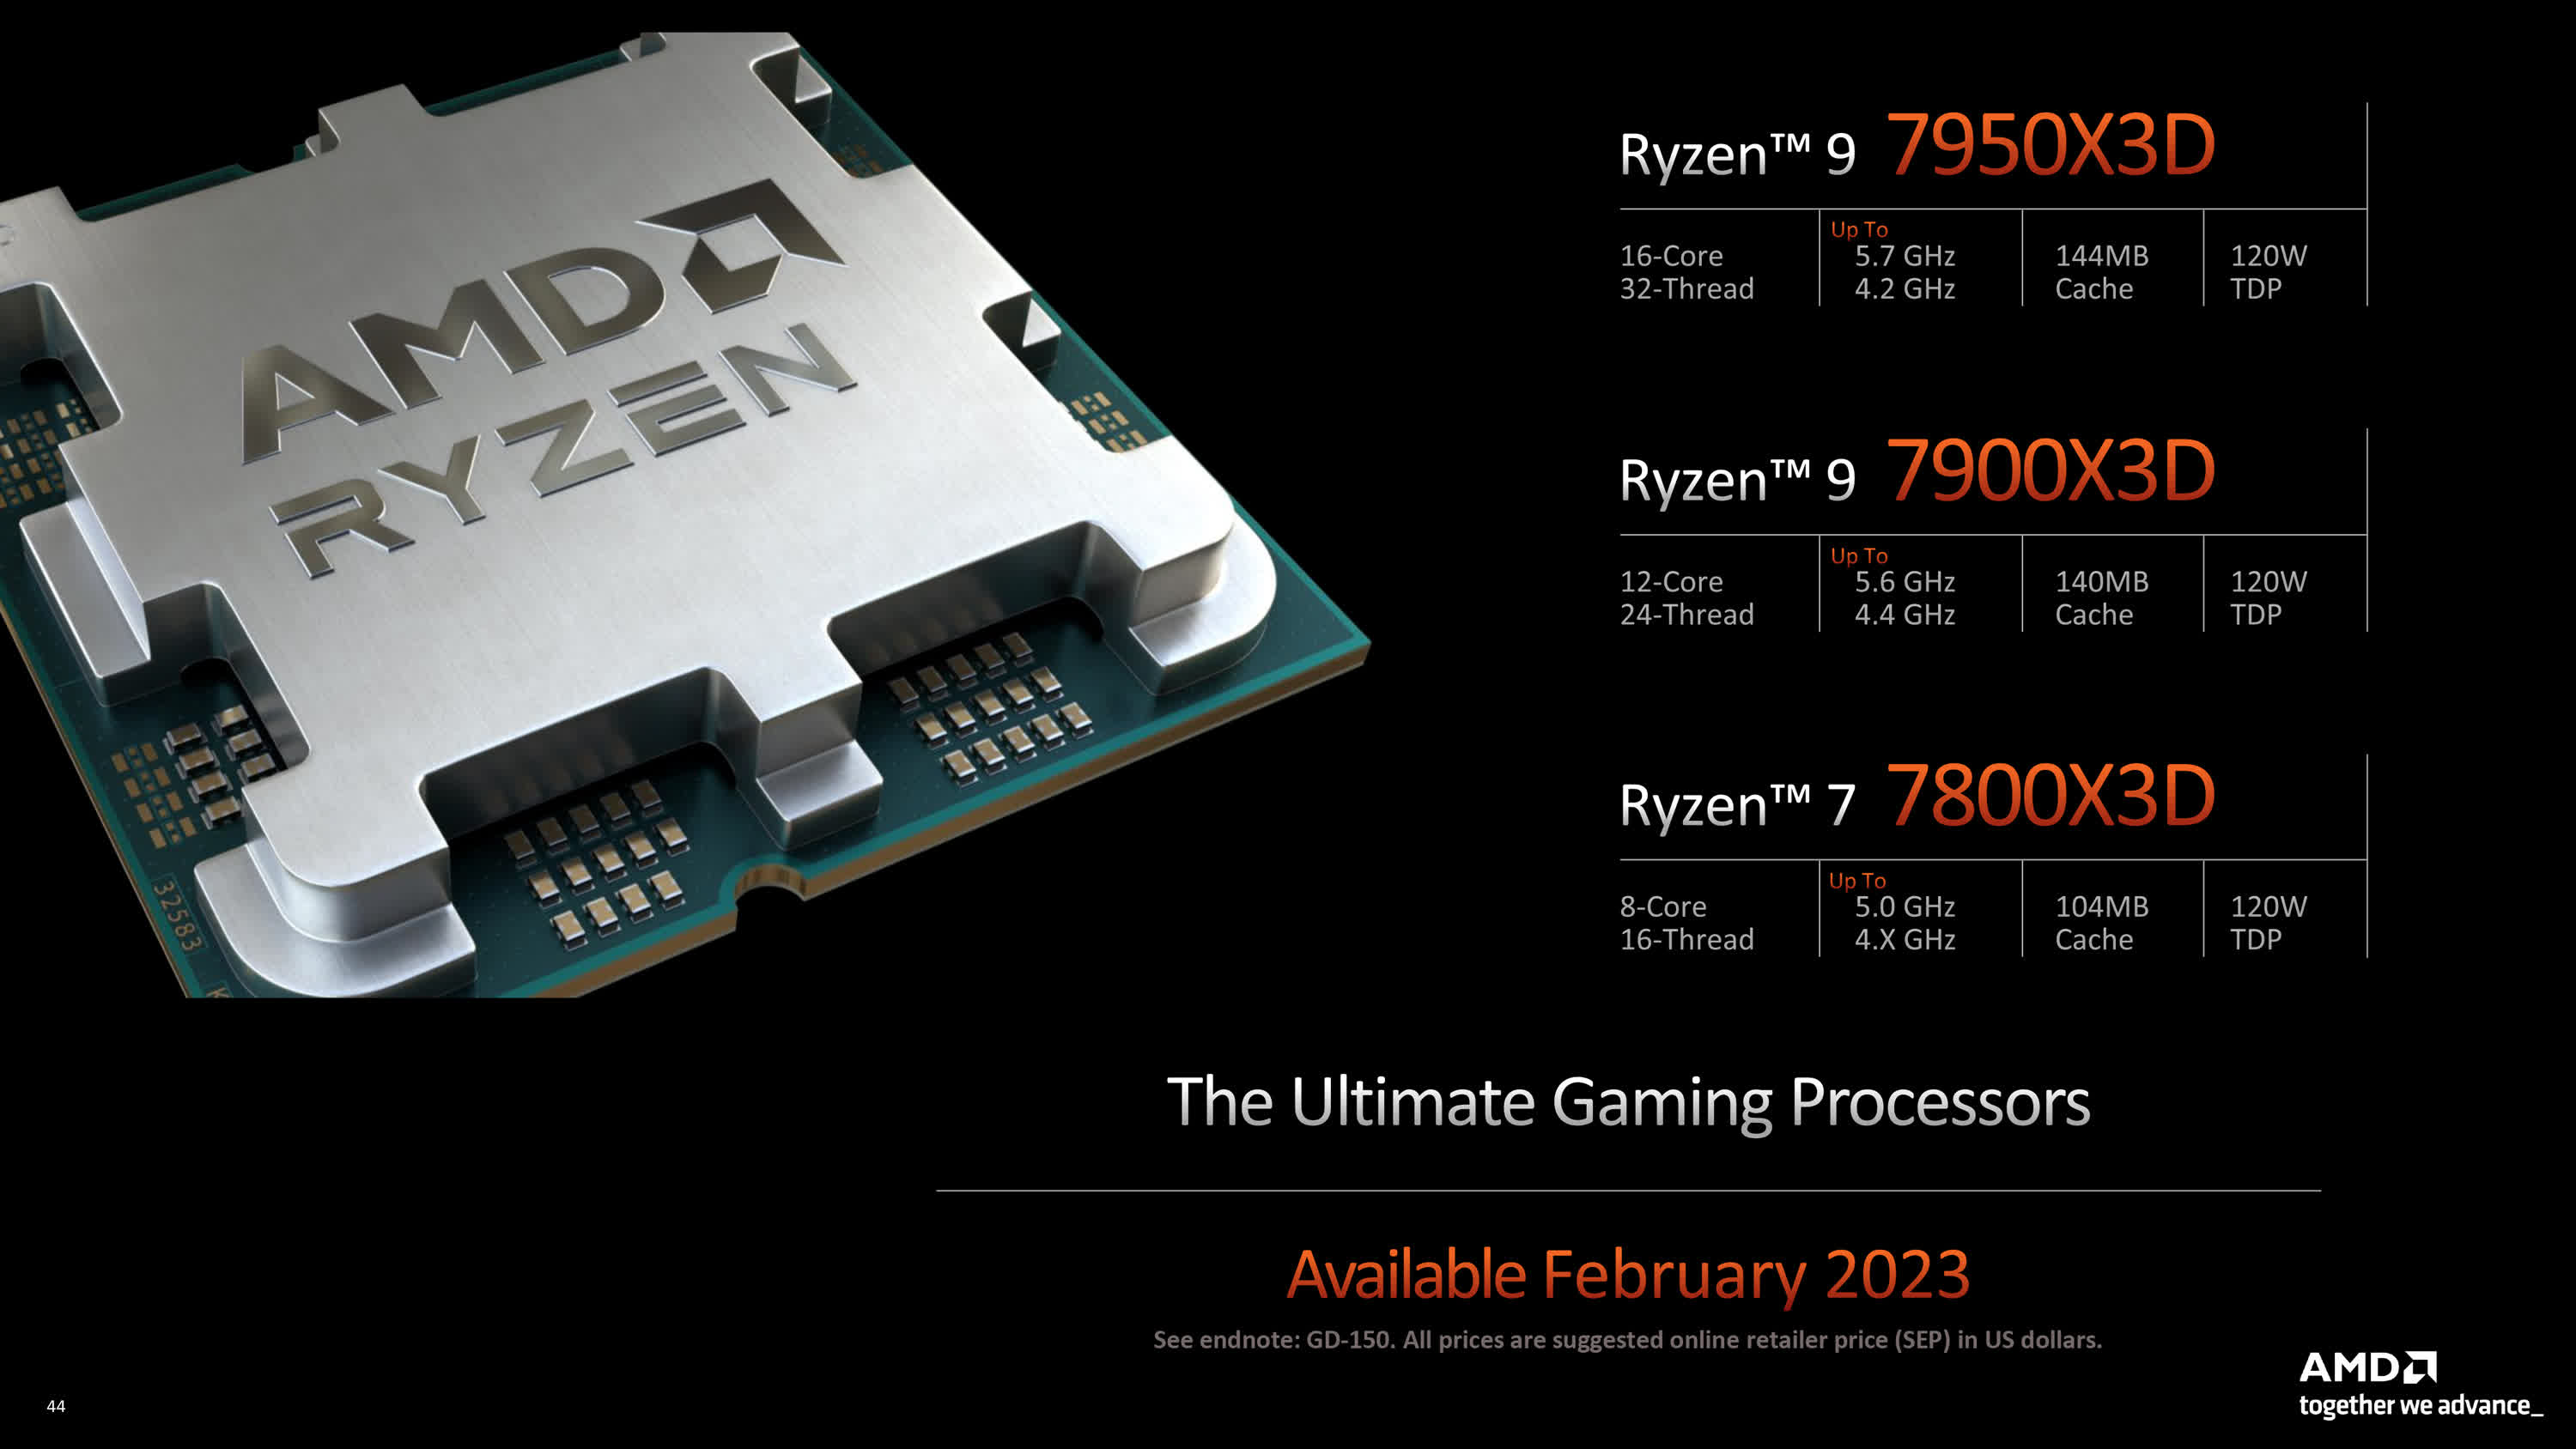 AMD / Nvidia / Intel CES 2023 Recap and Evaluation: 3D V-Cache, “RTX 4090” for laptops, new inexpensive CPUs